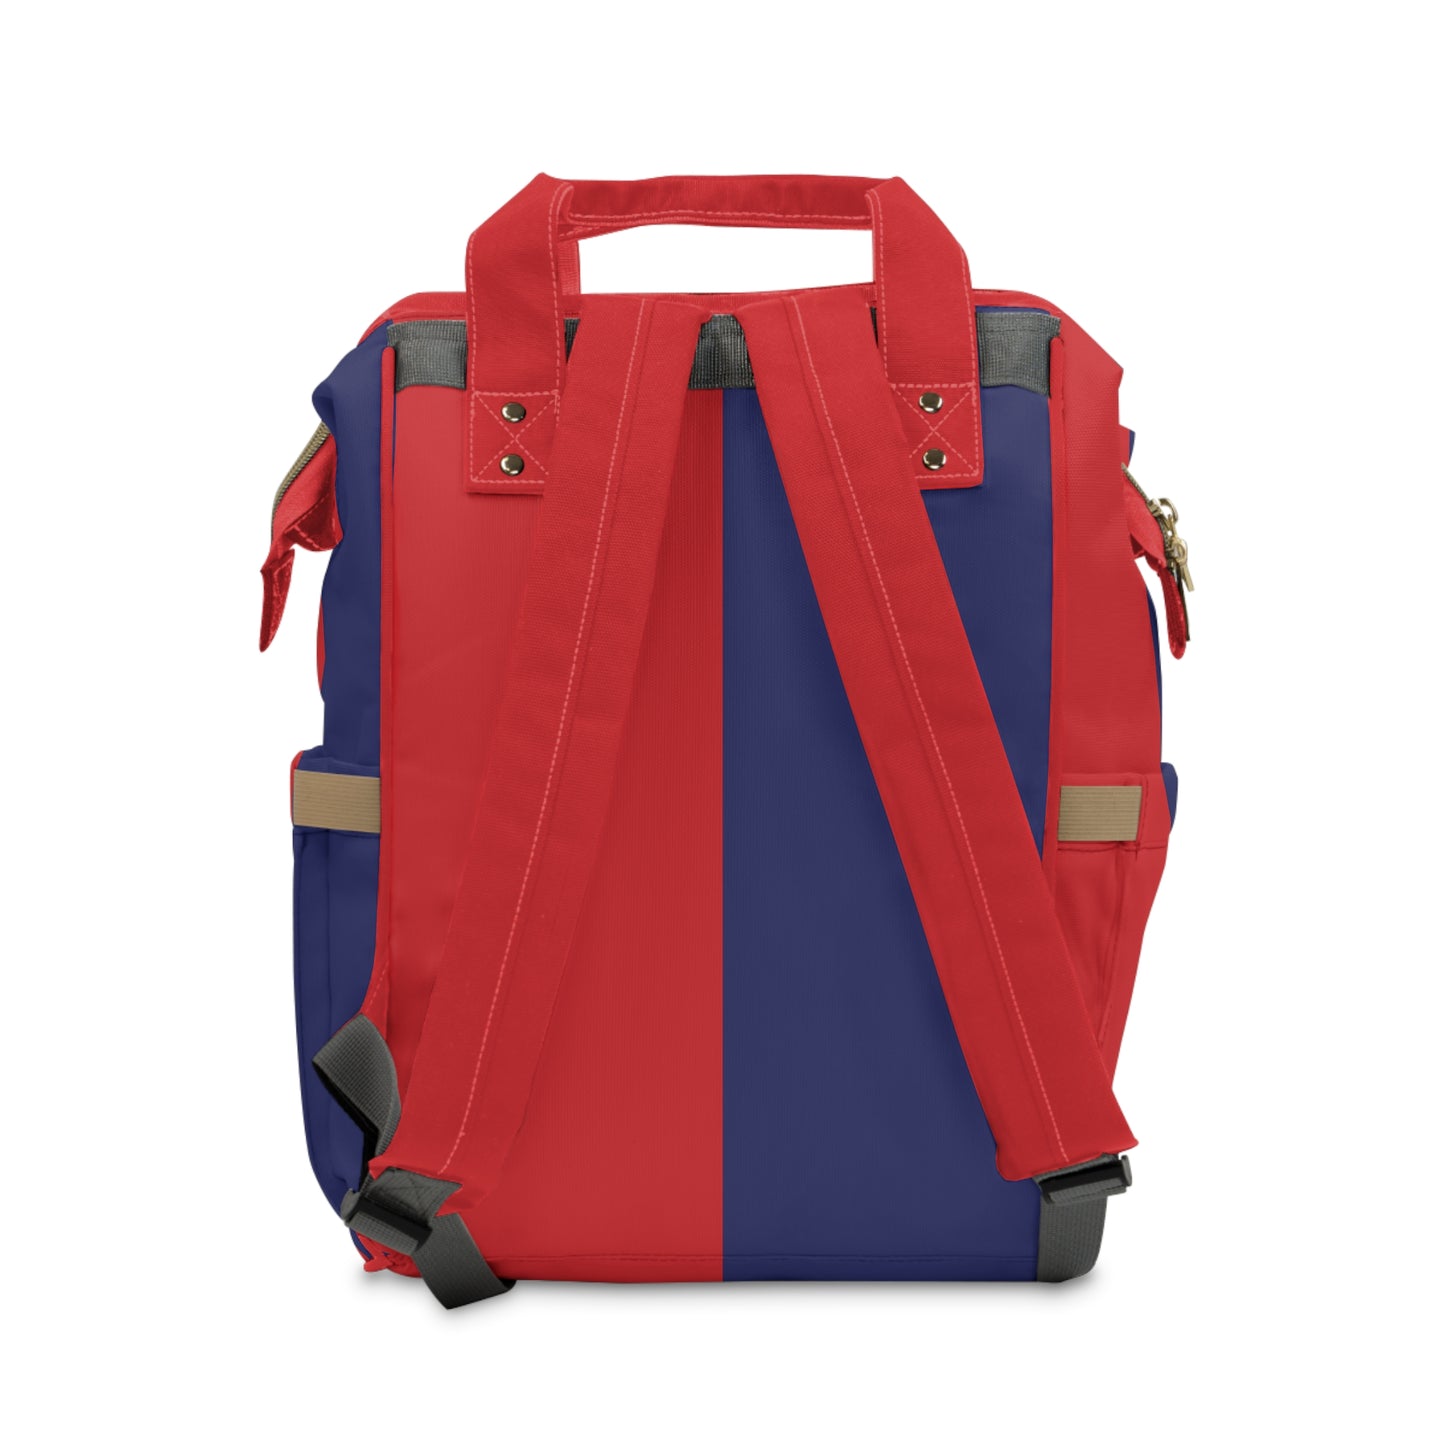 Nashville - Red White and Blue City series - Multifunctional Diaper Backpack